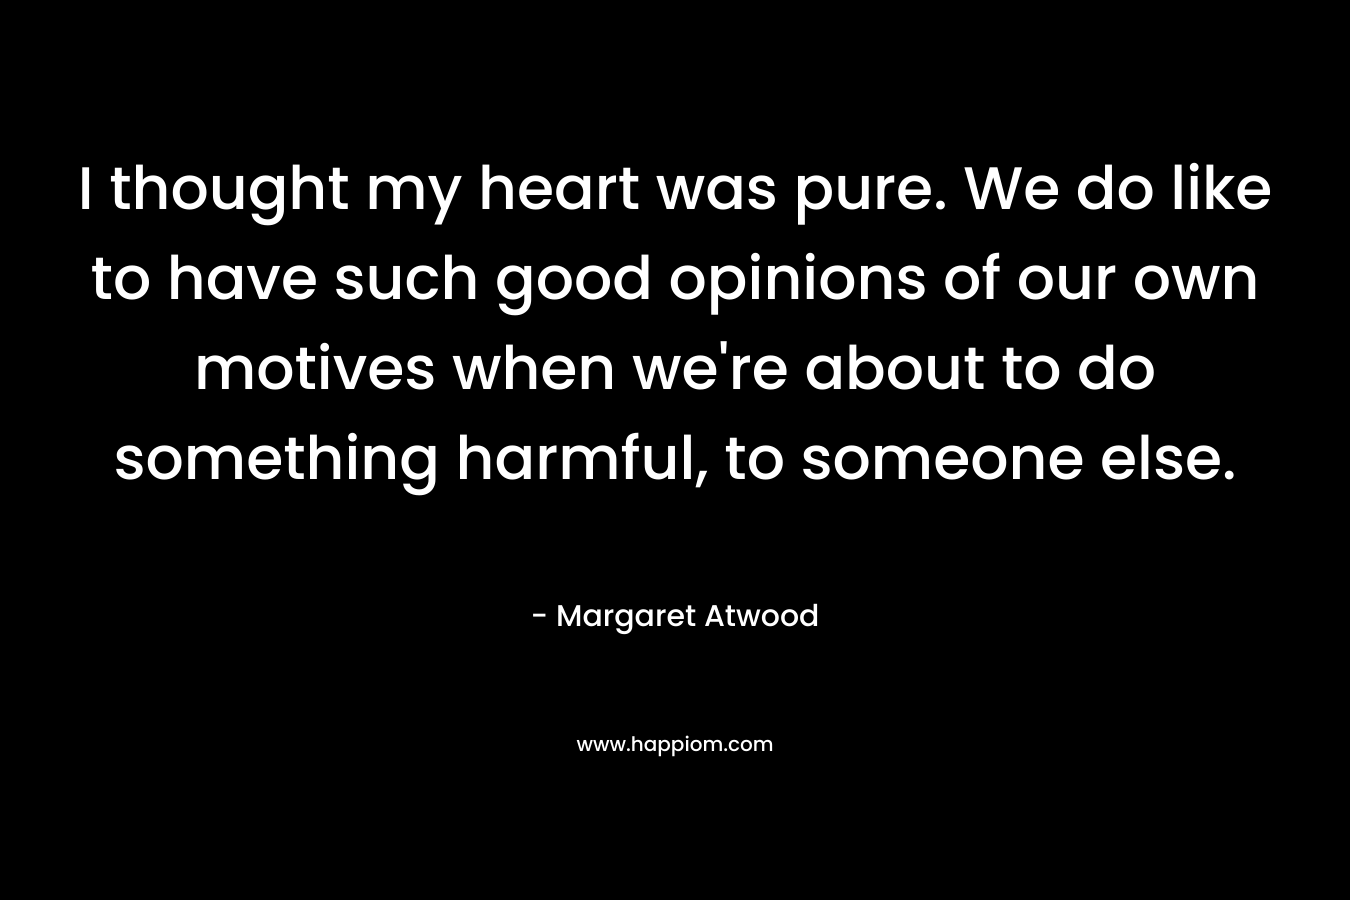 I thought my heart was pure. We do like to have such good opinions of our own motives when we’re about to do something harmful, to someone else. – Margaret Atwood